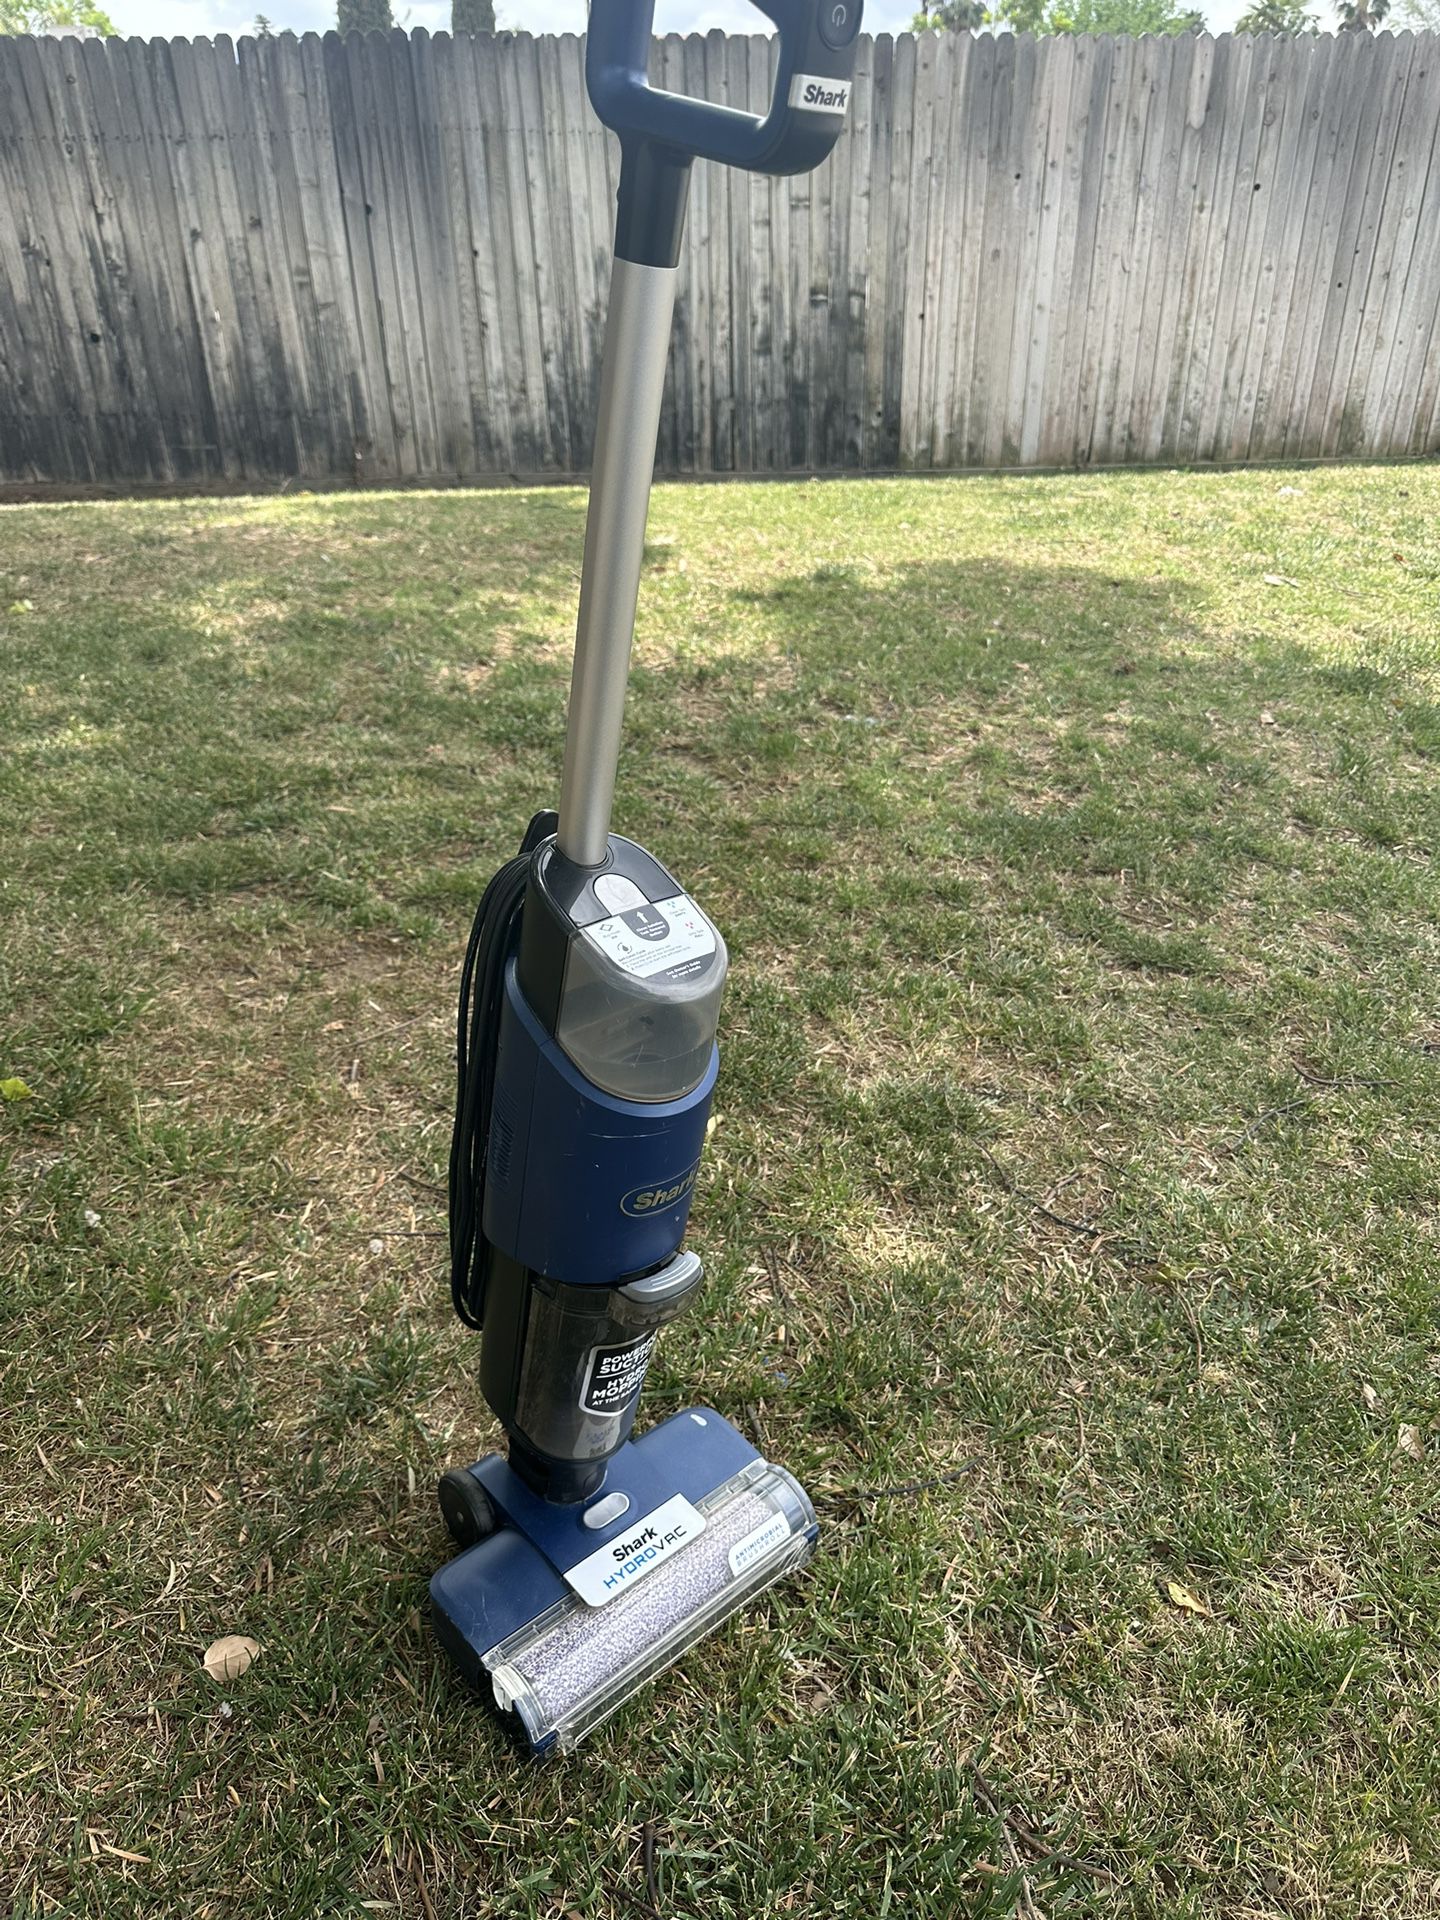 Used It In Great Condition Shark HydroVac XL 3 in 1 Vacuum, Mop, and Self Cleaning Corded System for Hardwood, Tile, Marble, & Area Rugs, Navy